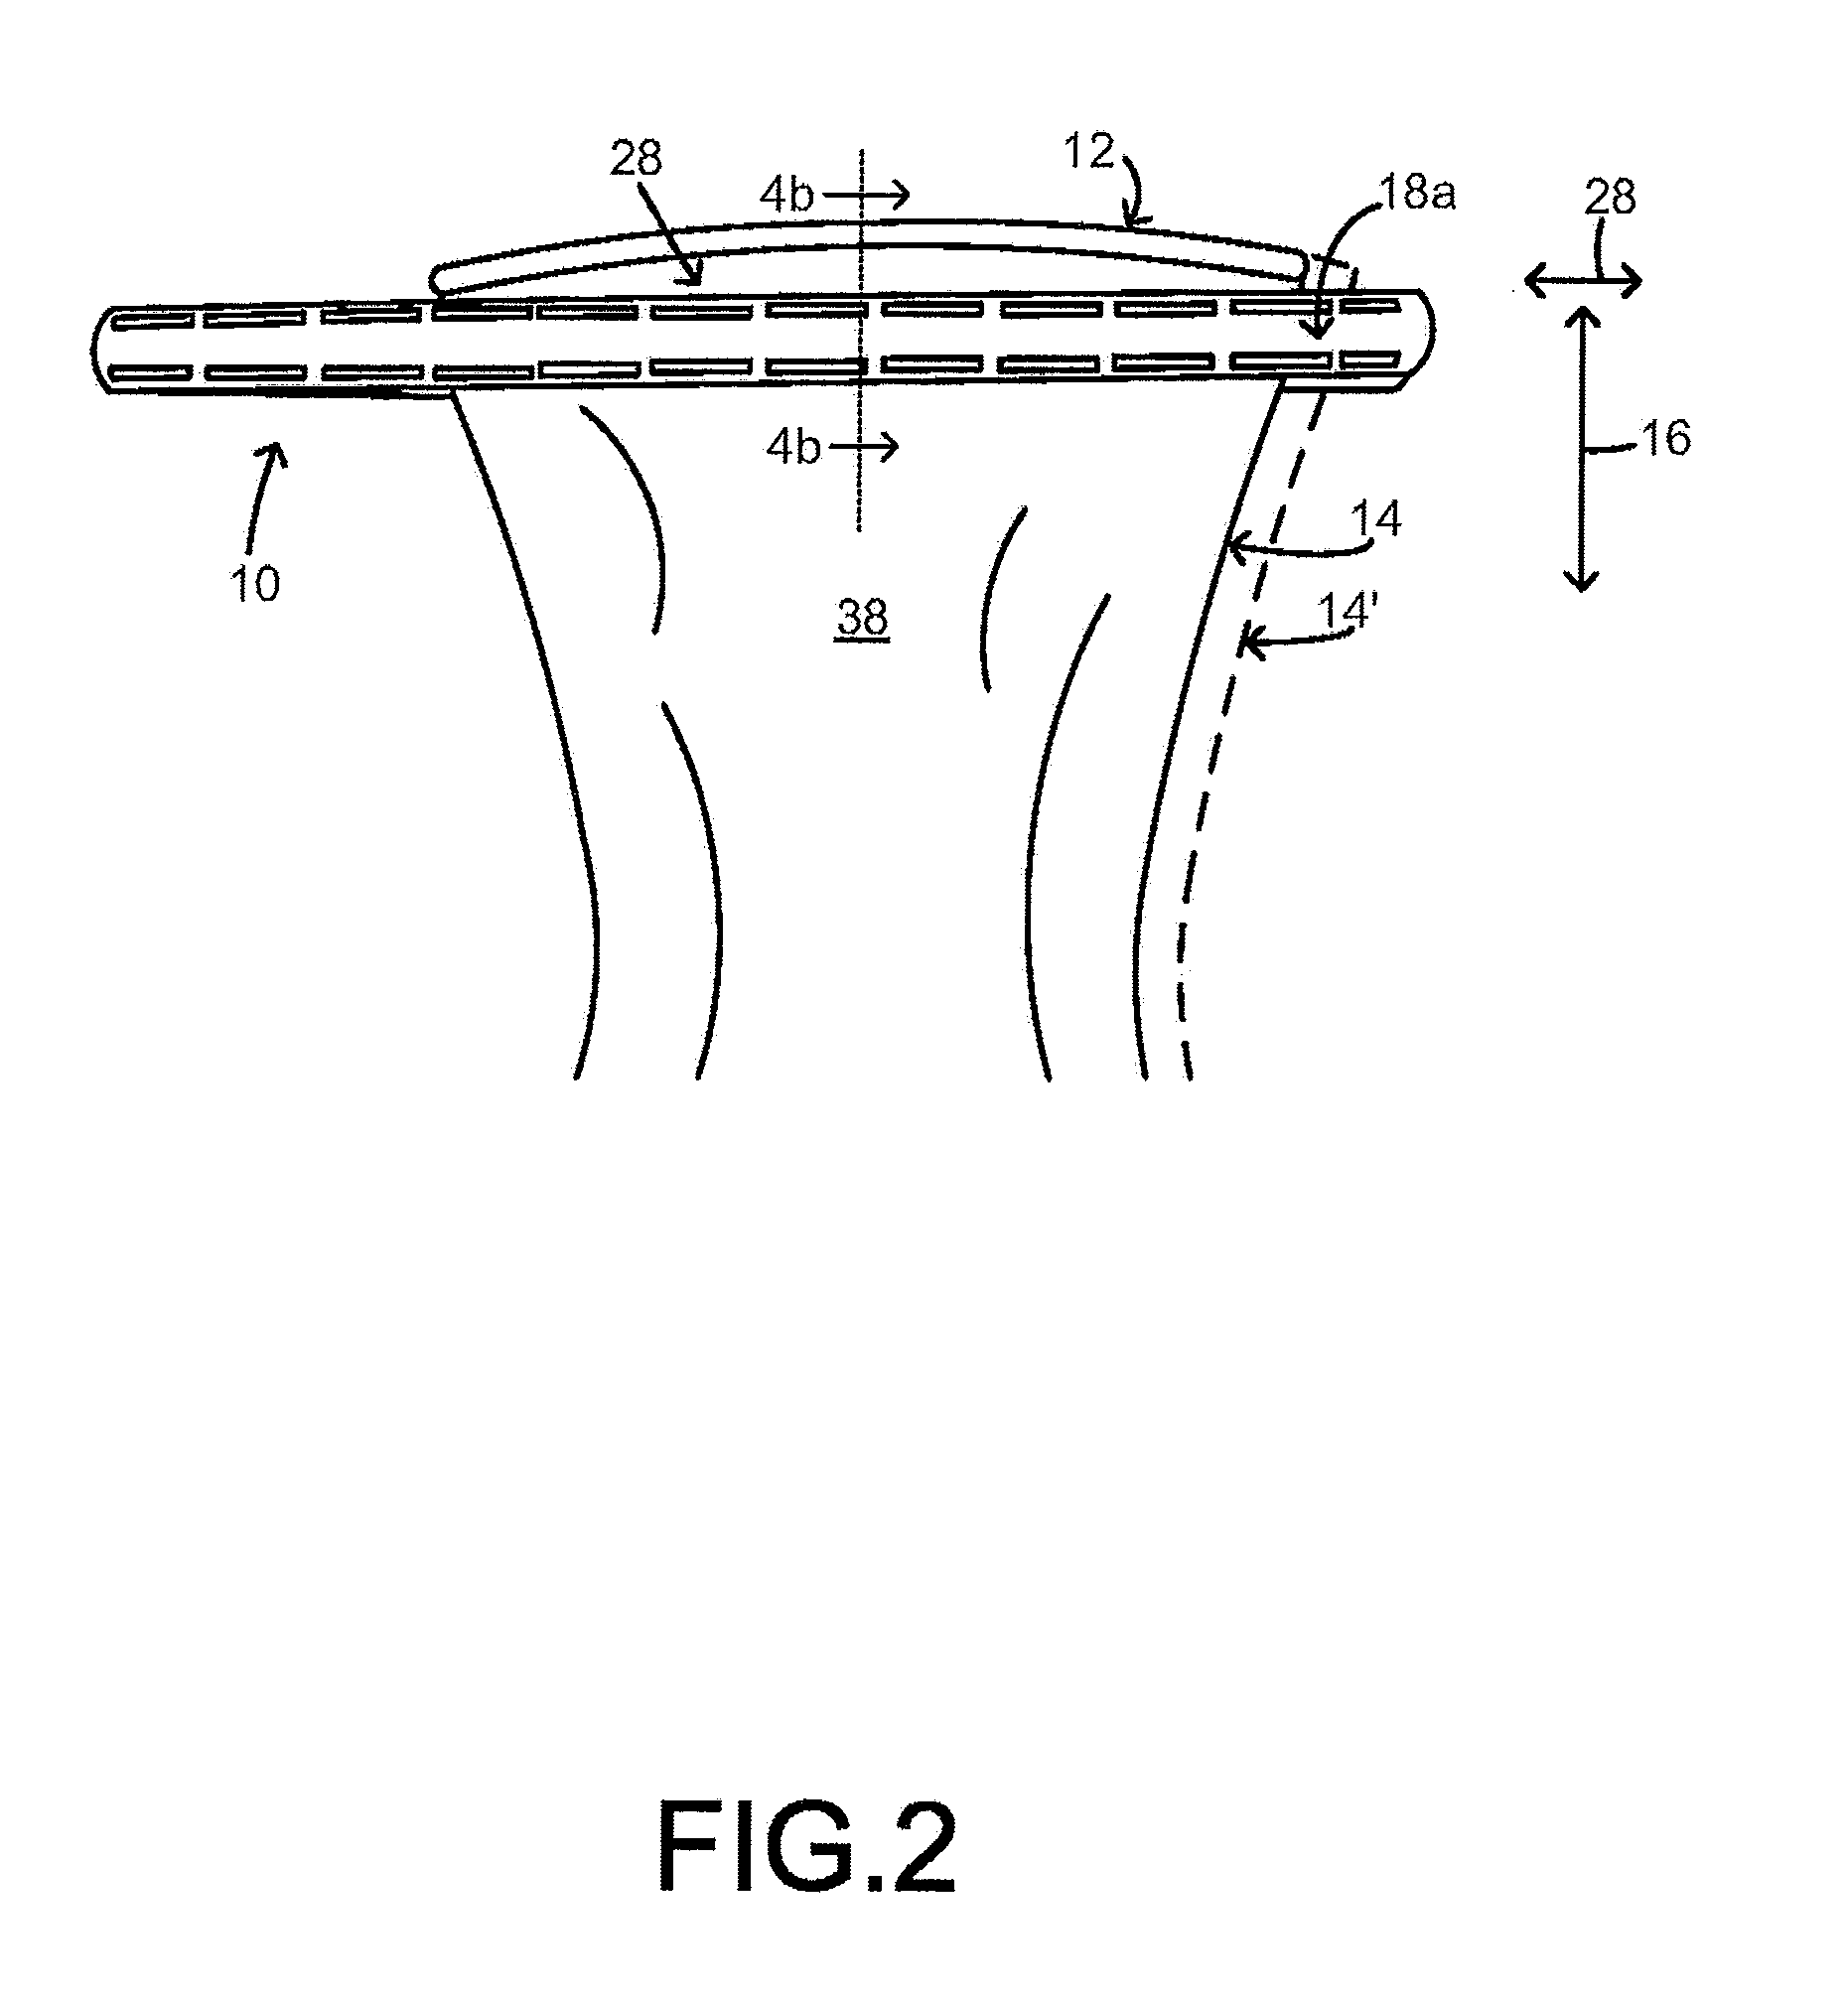 Glove testing device and method